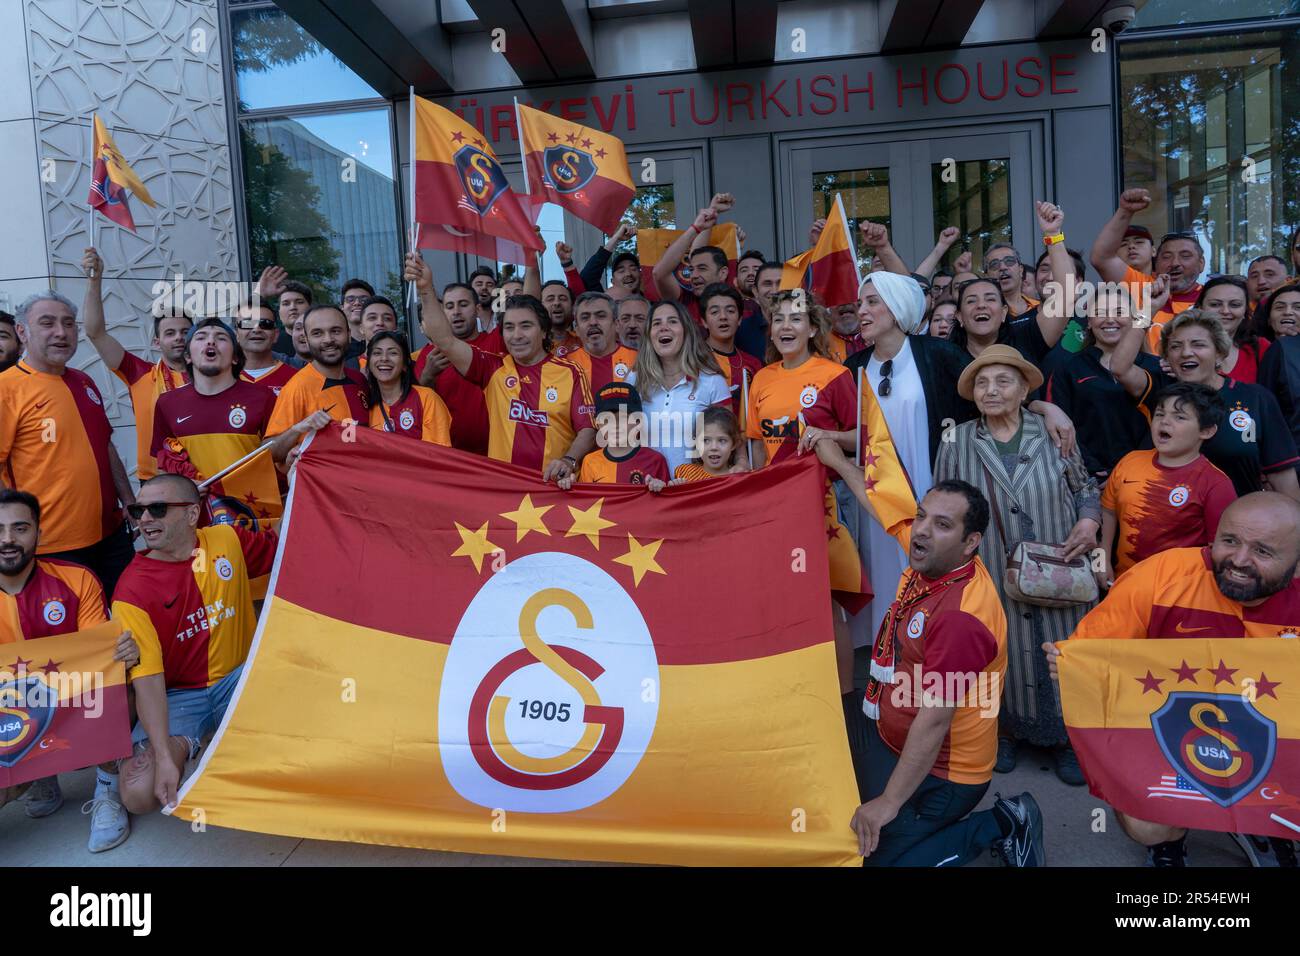 New York, United States. 31st May, 2023. NEW YORK, NEW YORK - May 31: Fans wearing red-and-yellow Jerseys and waving flags in red-and-yellow colours celebrate the Galatasaray record 23rd Turkish super league title outside the Permanent Mission of Turkey to the United Nations on May 31, 2023 in New York City. Galatasaray claimed their 23rd Turkish league title with a 4-1 victory over Ankaragucu in their penultimate match of the Super league season on Tuesday. Credit: Ron Adar/Alamy Live News Stock Photo